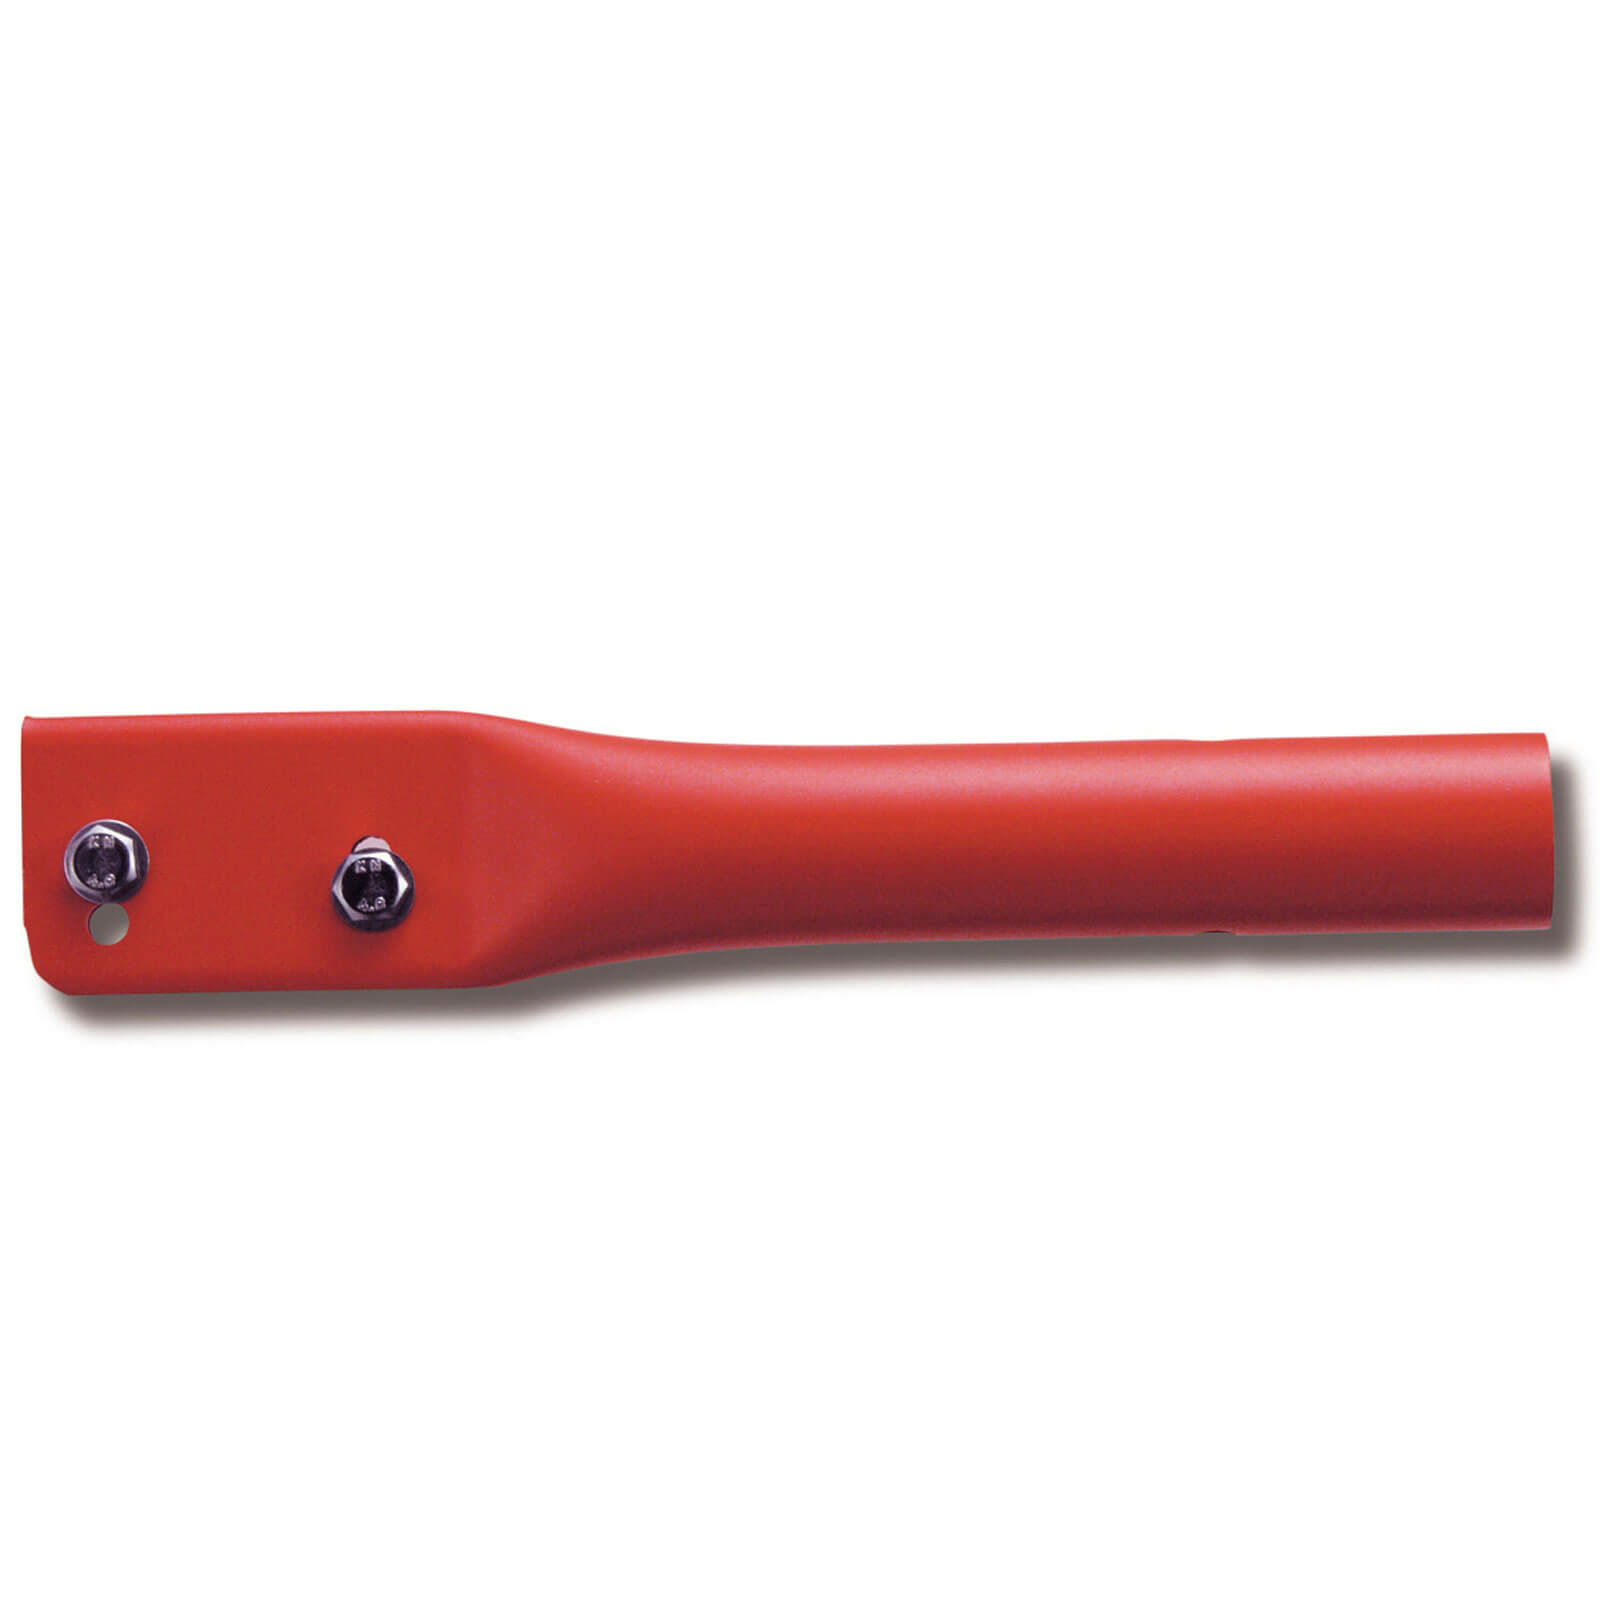 Image of ARS Pole Saw Blade Grip for Round Poles